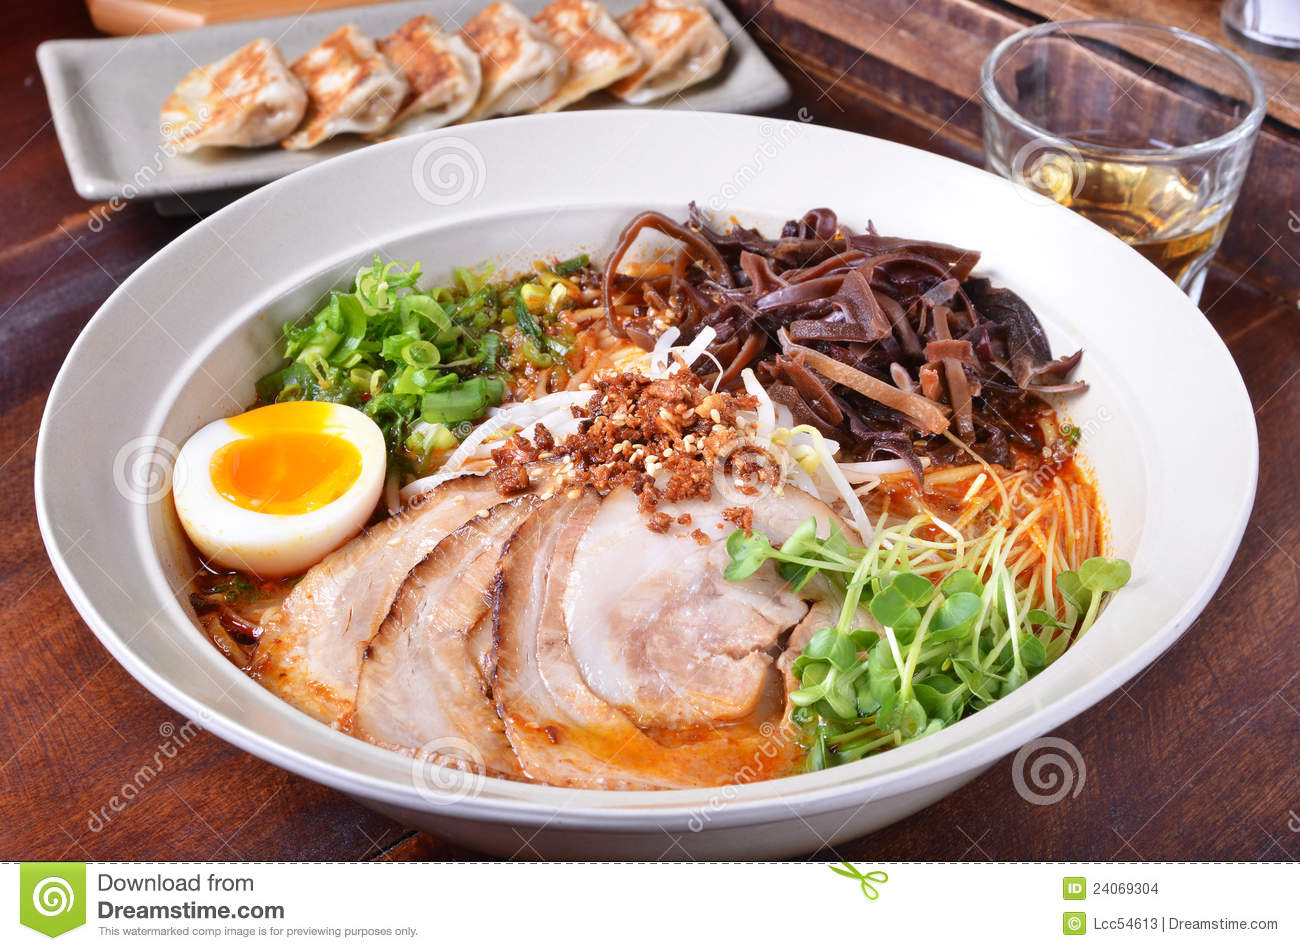 Japanese Ramen Noodles With Meat Stock Images   Image  24069304